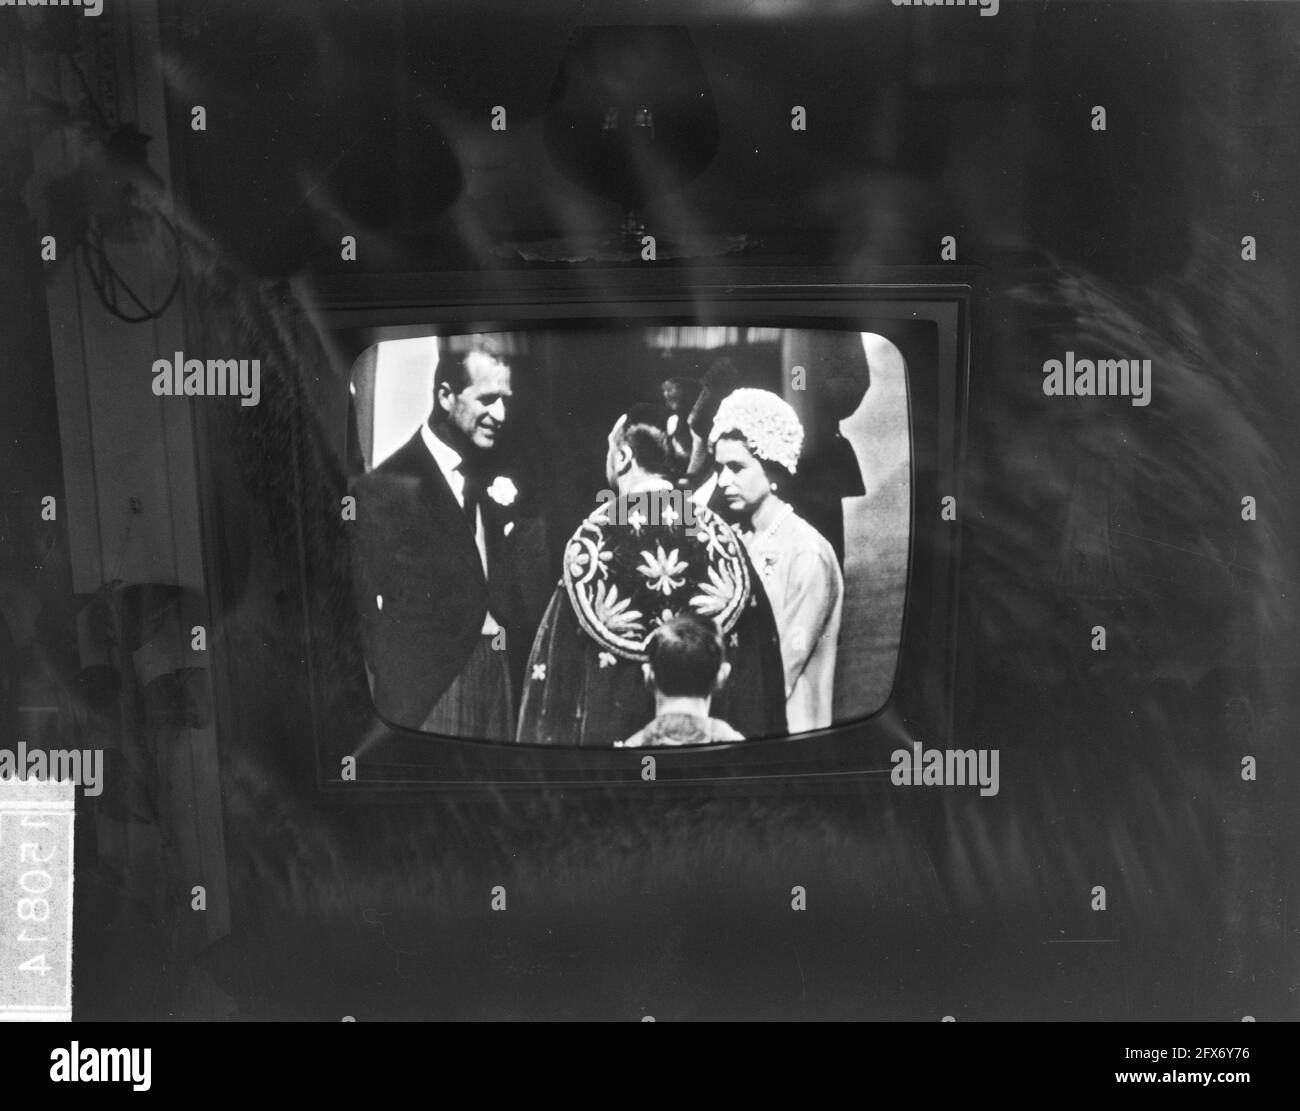 Marriage Alexandra of Kent to Angus Ogilvy at Westminster Abbey in London [photo from TV]. Prince Philip (left) and Queen Elizabeth in conversation with the Archbishop of [Canterbury?], April 24, 1963, gentry, marriages, The Netherlands, 20th century press agency photo, news to remember, documentary, historic photography 1945-1990, visual stories, human history of the Twentieth Century, capturing moments in time Stock Photo